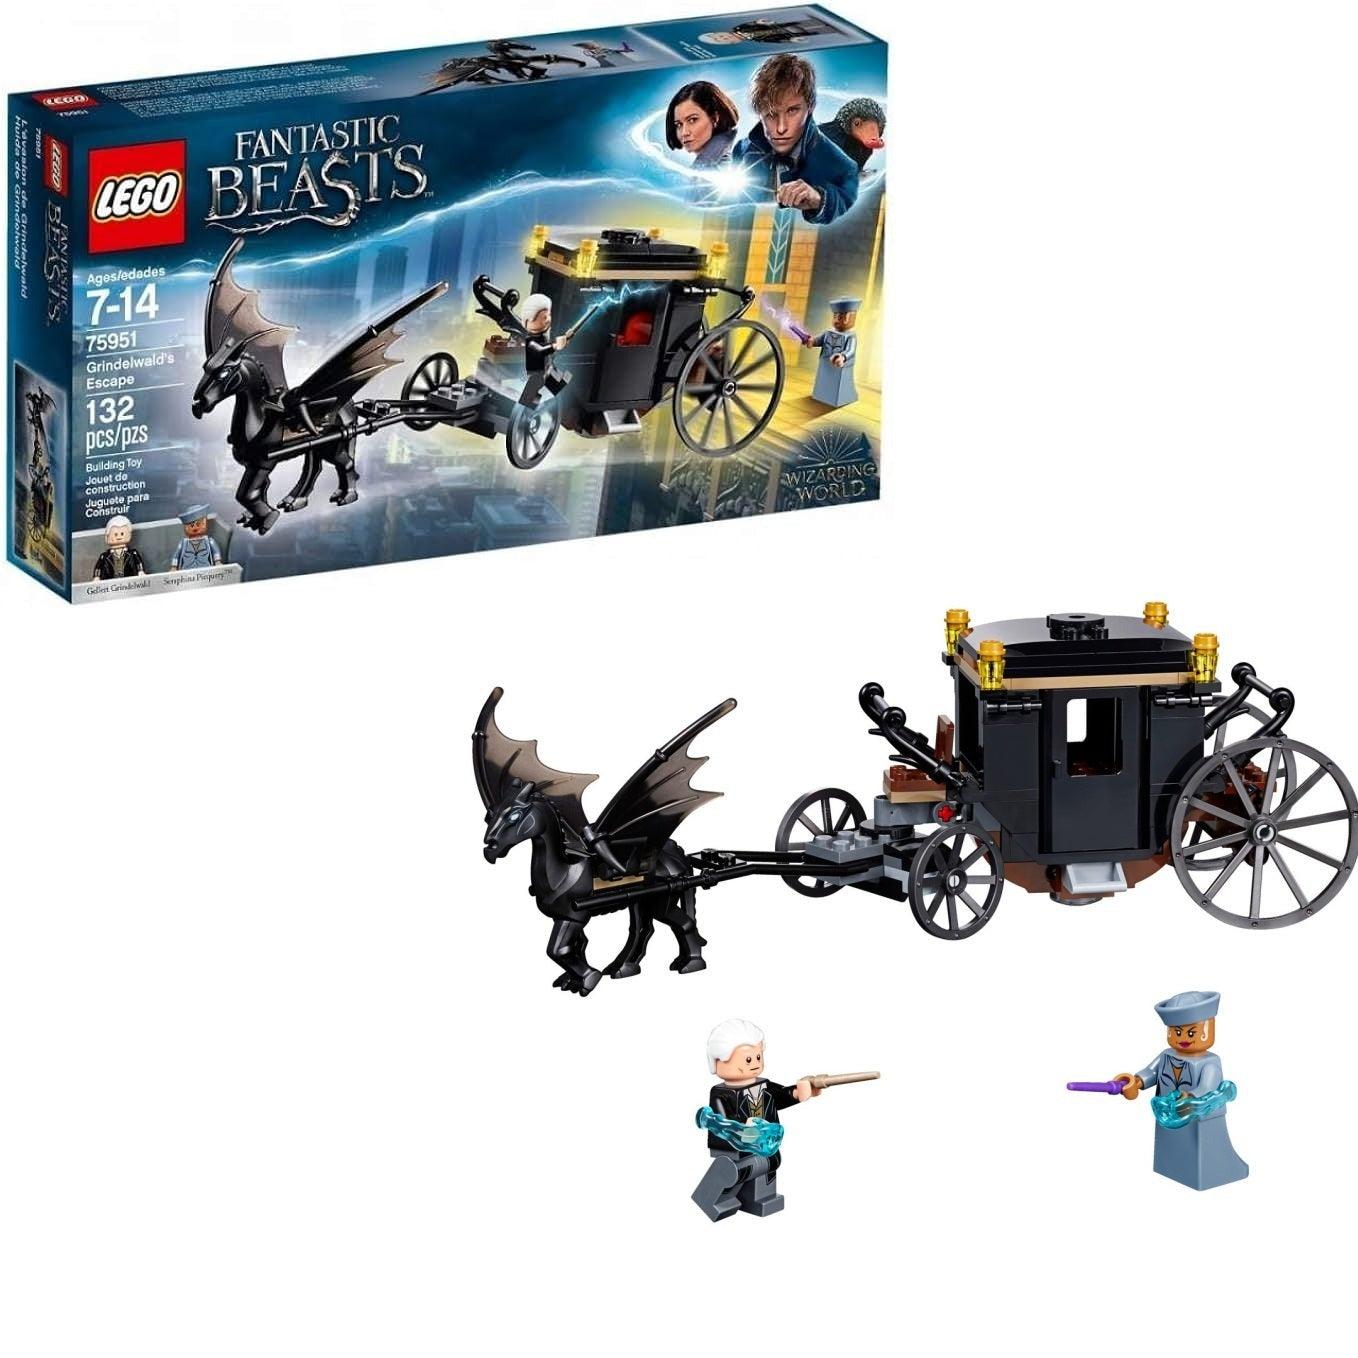 LEGO Grindewald's ontsnapping uit Fantastic Beasts 75951 Harry Potter | 2TTOYS ✓ Official shop<br>